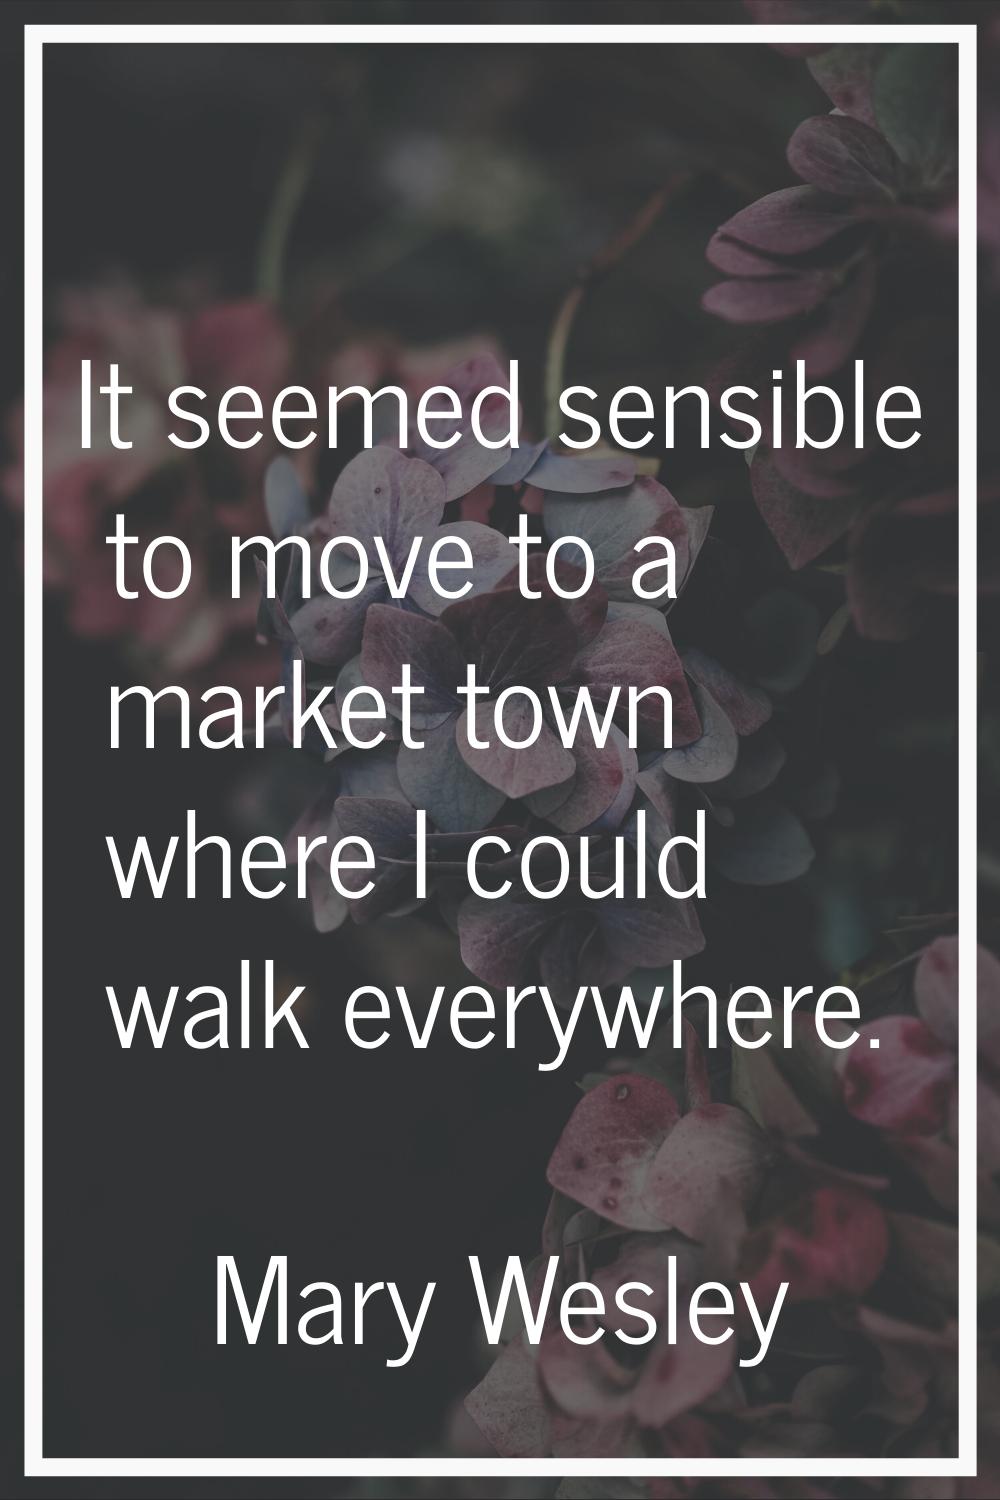 It seemed sensible to move to a market town where I could walk everywhere.